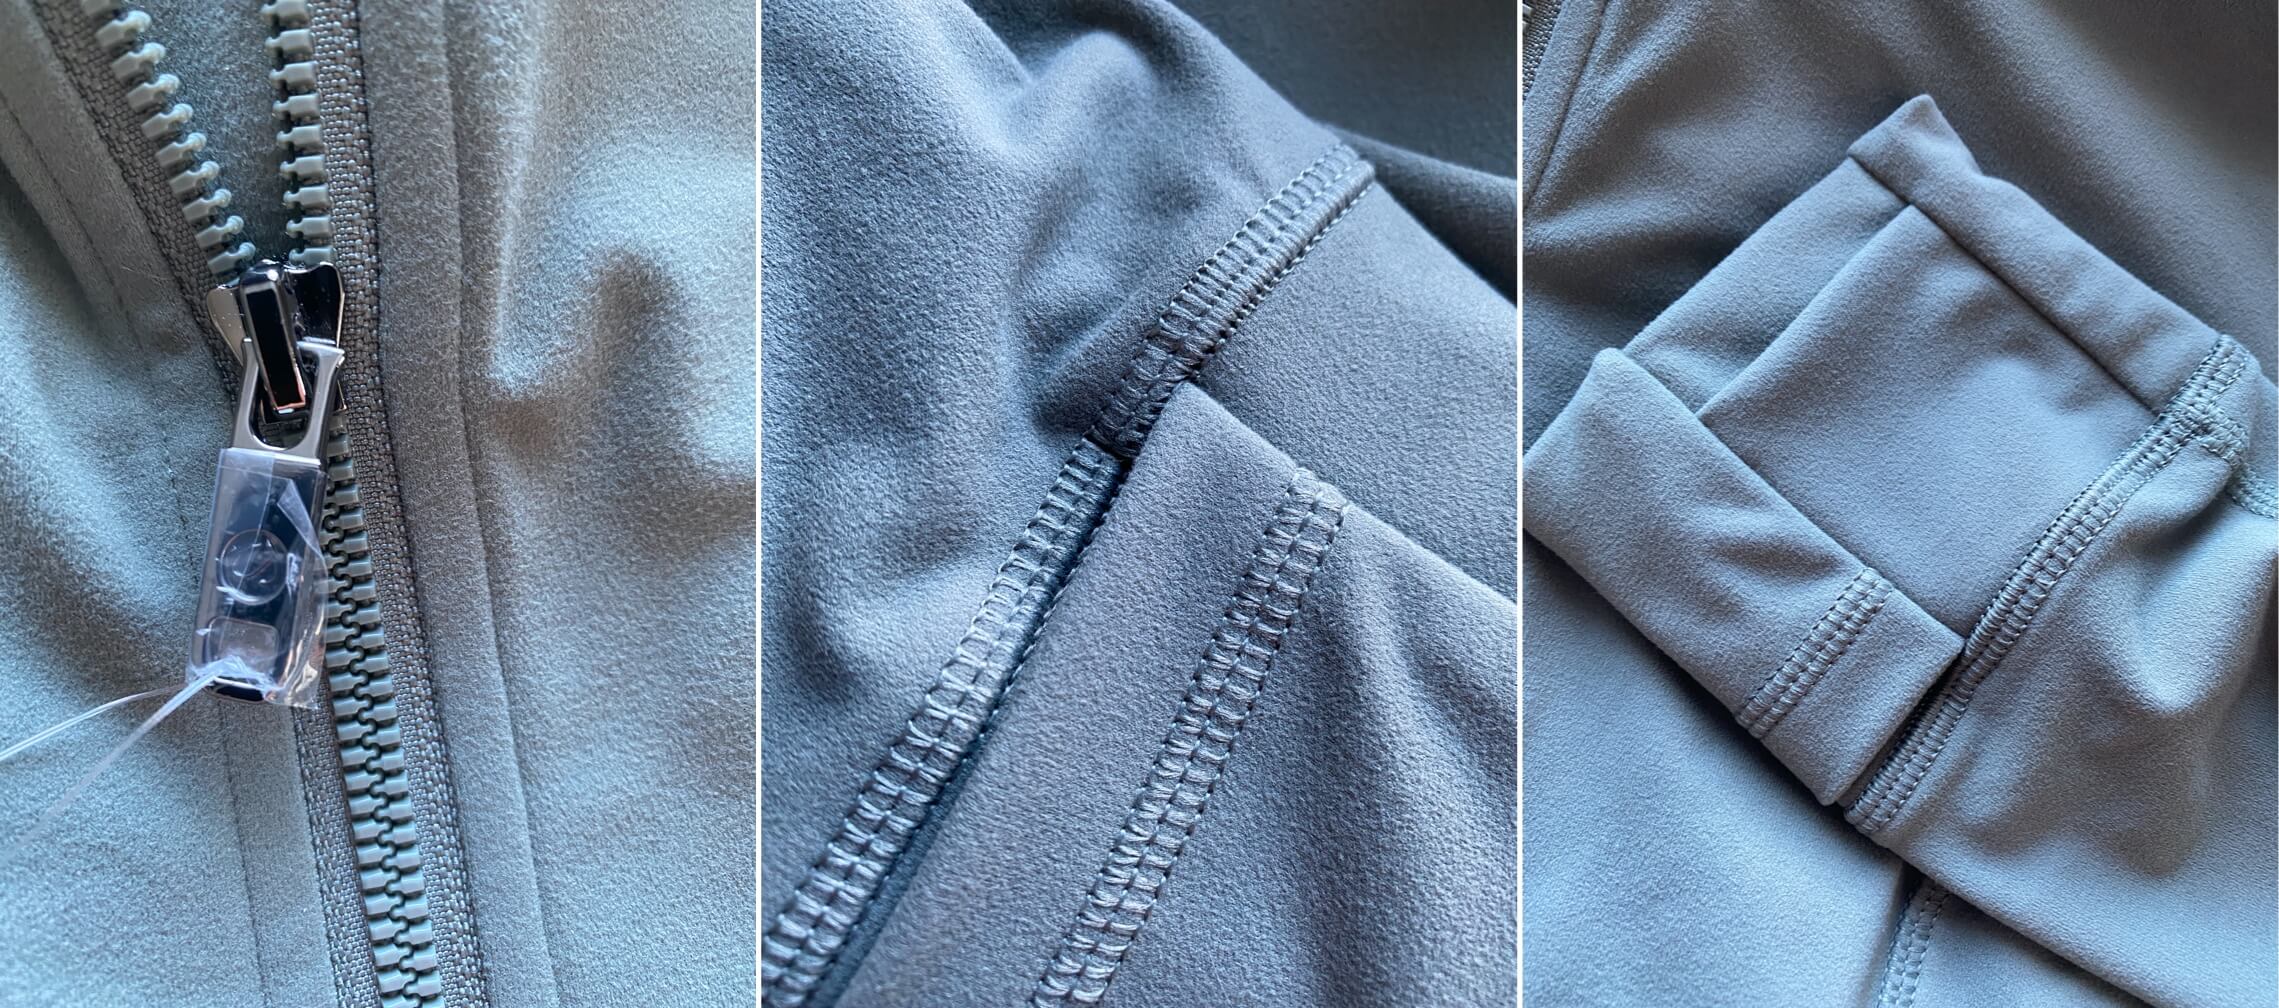 inspired by Lululemon hooded define jacket, alternative by CRZ Yoga - details like the brushed fabric and sleeve cuffs